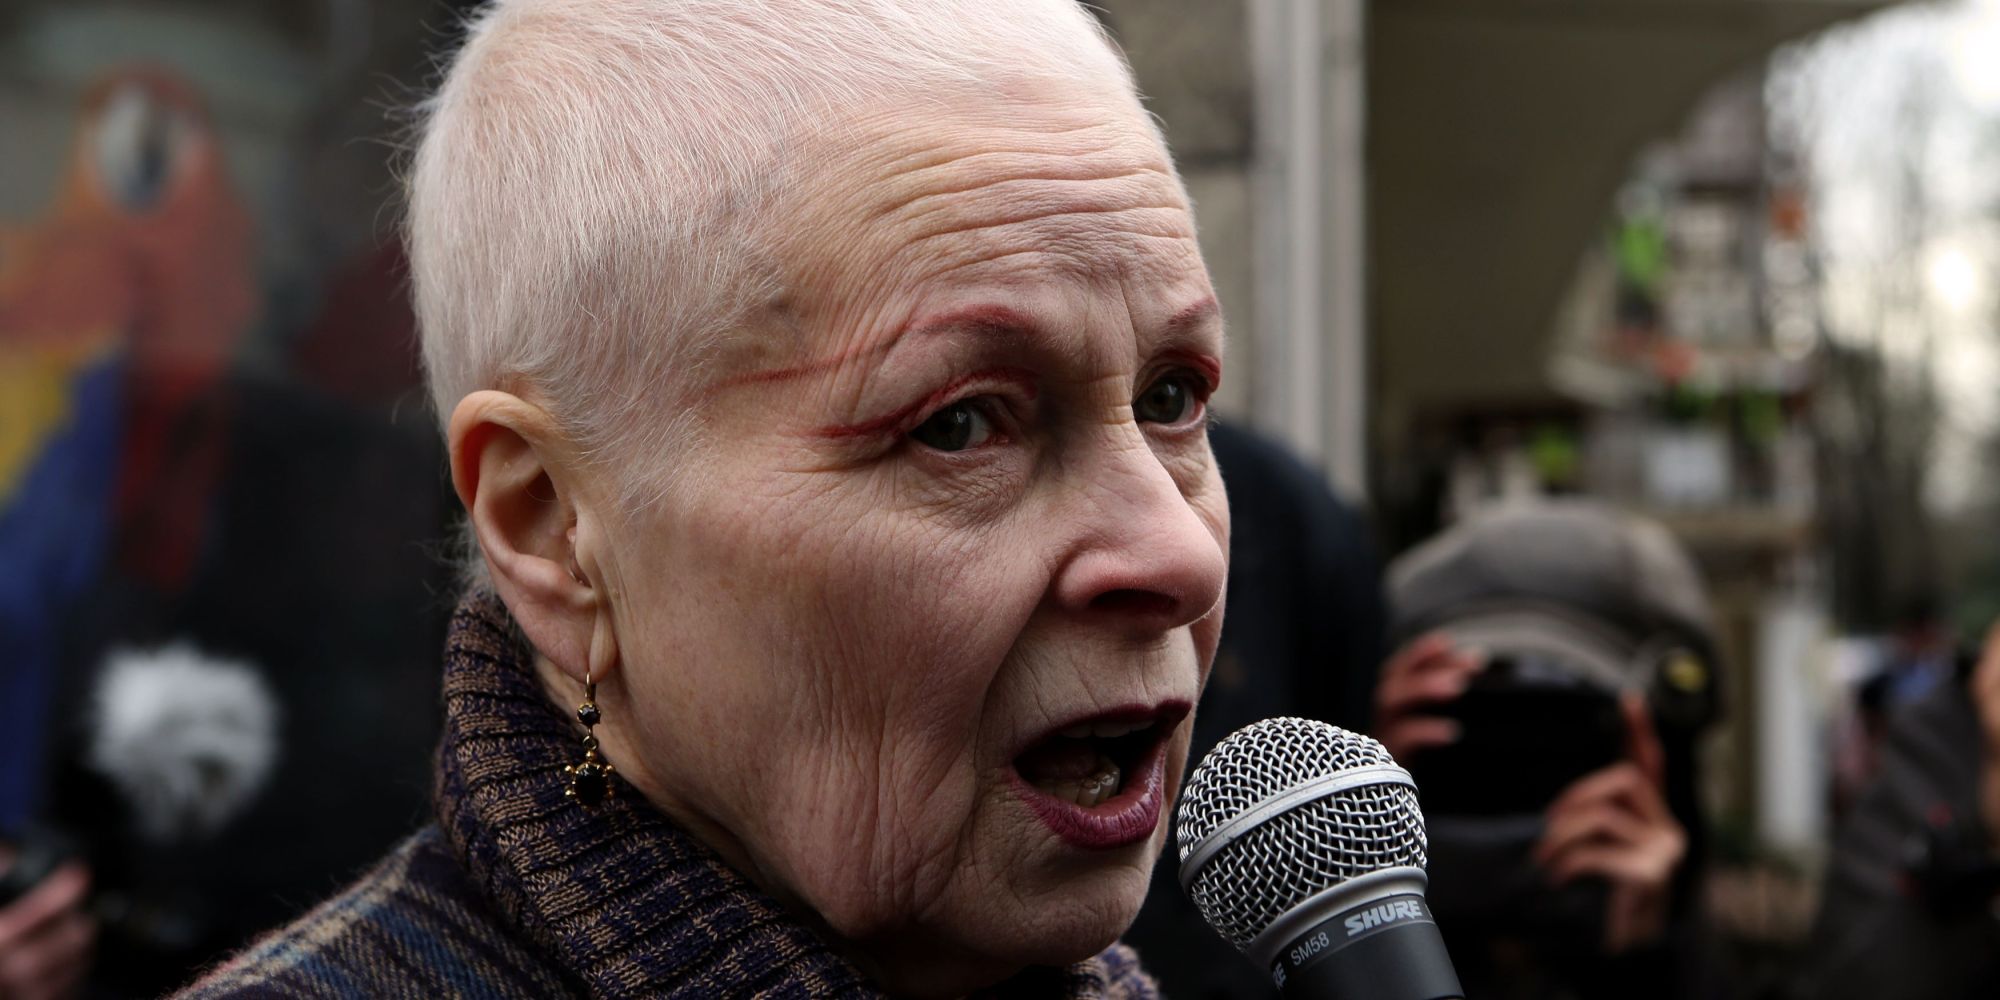 Vivienne Westwood 'Eat Less' Row Gets Even More Awkward | HuffPost UK